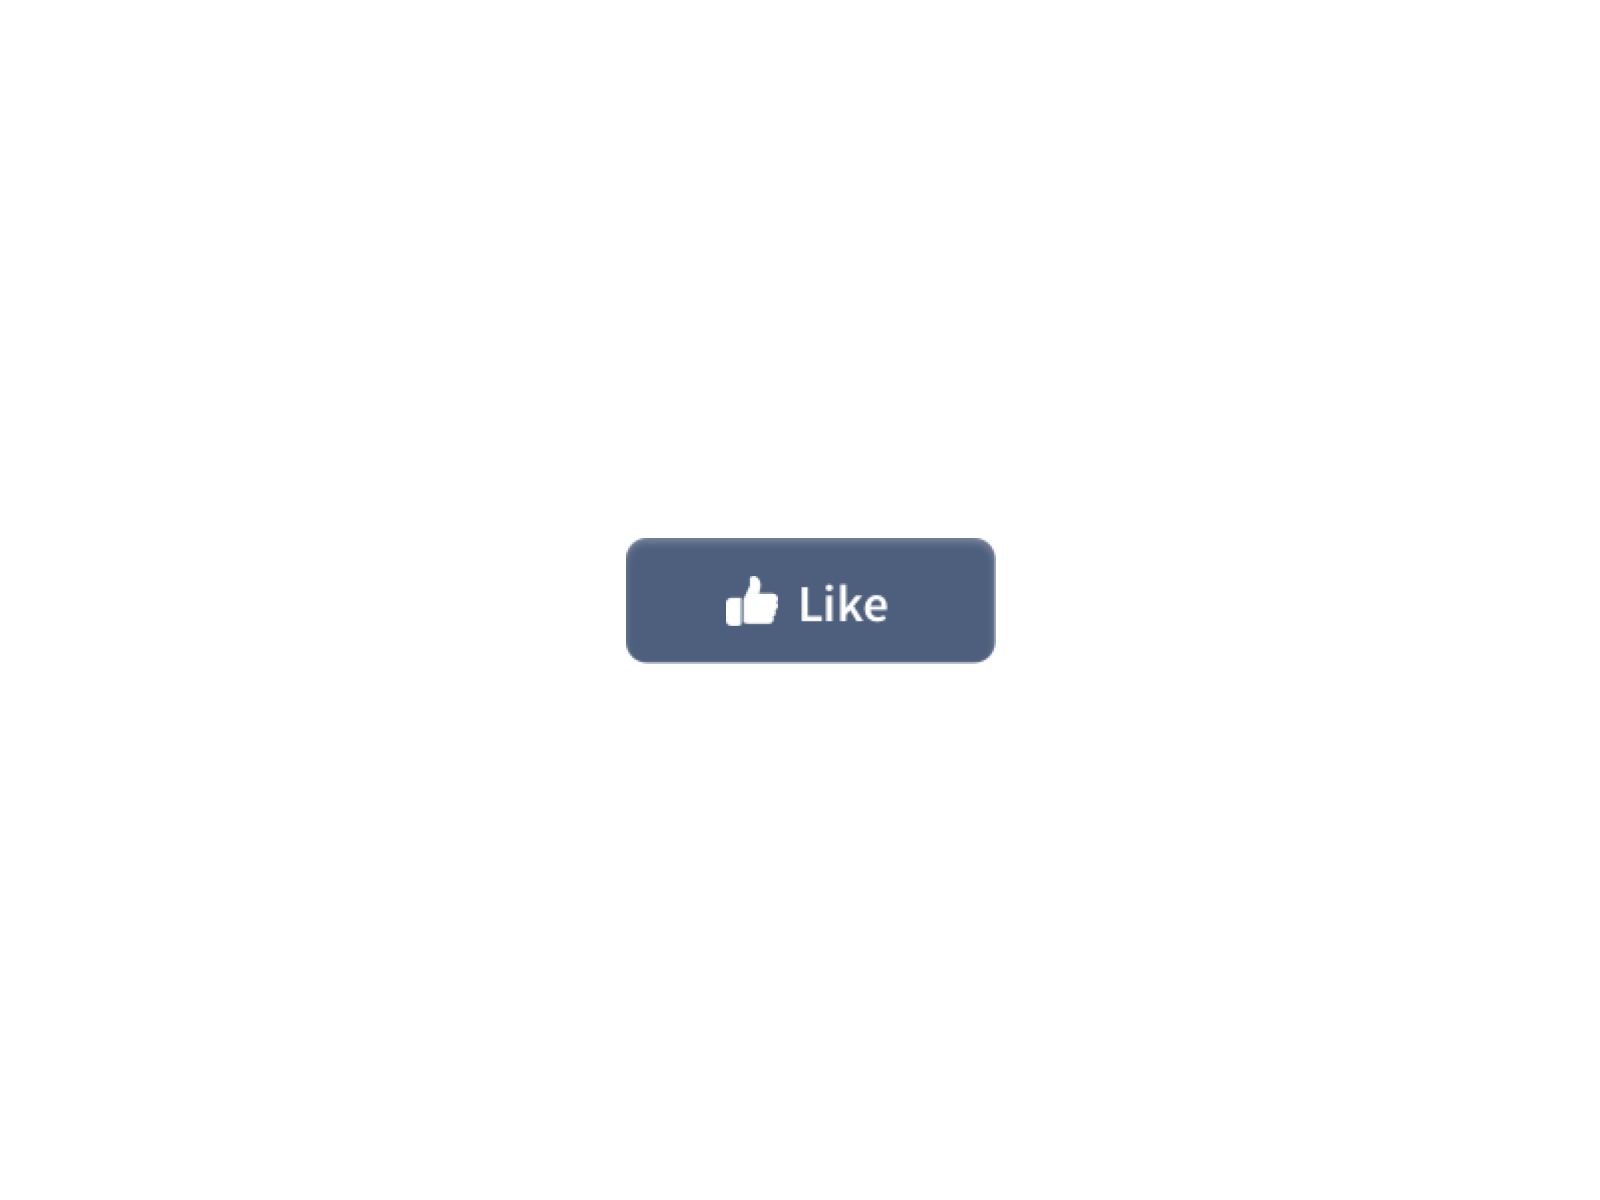 Like Button Micro Interaction animation button animation icon interactiondesign microinteraction uiux user experience user interface